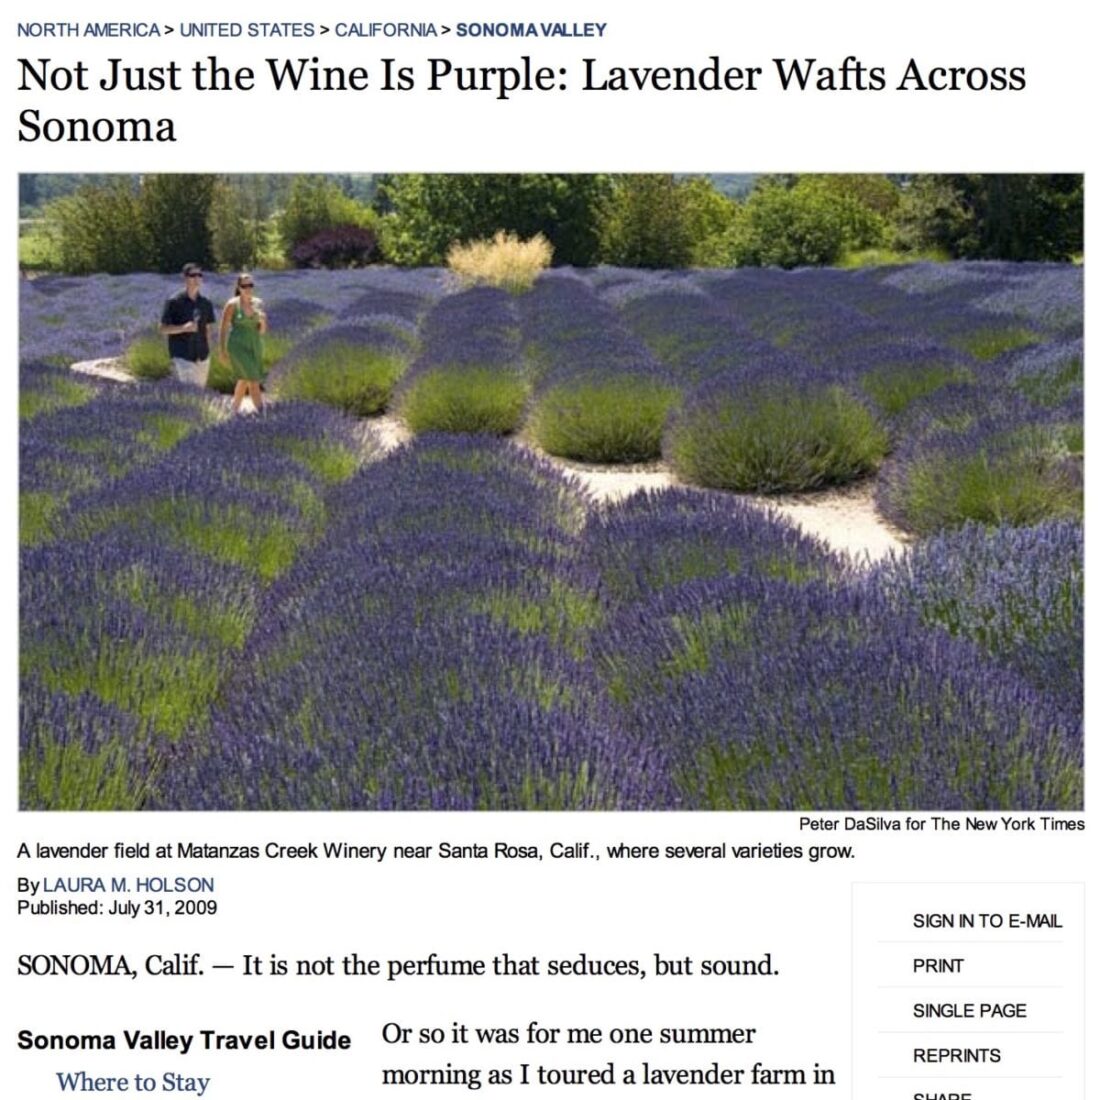 New York Times article. Headline Text: Not Just the Wine is Purple; Lavender Wafts Across Sonoma.